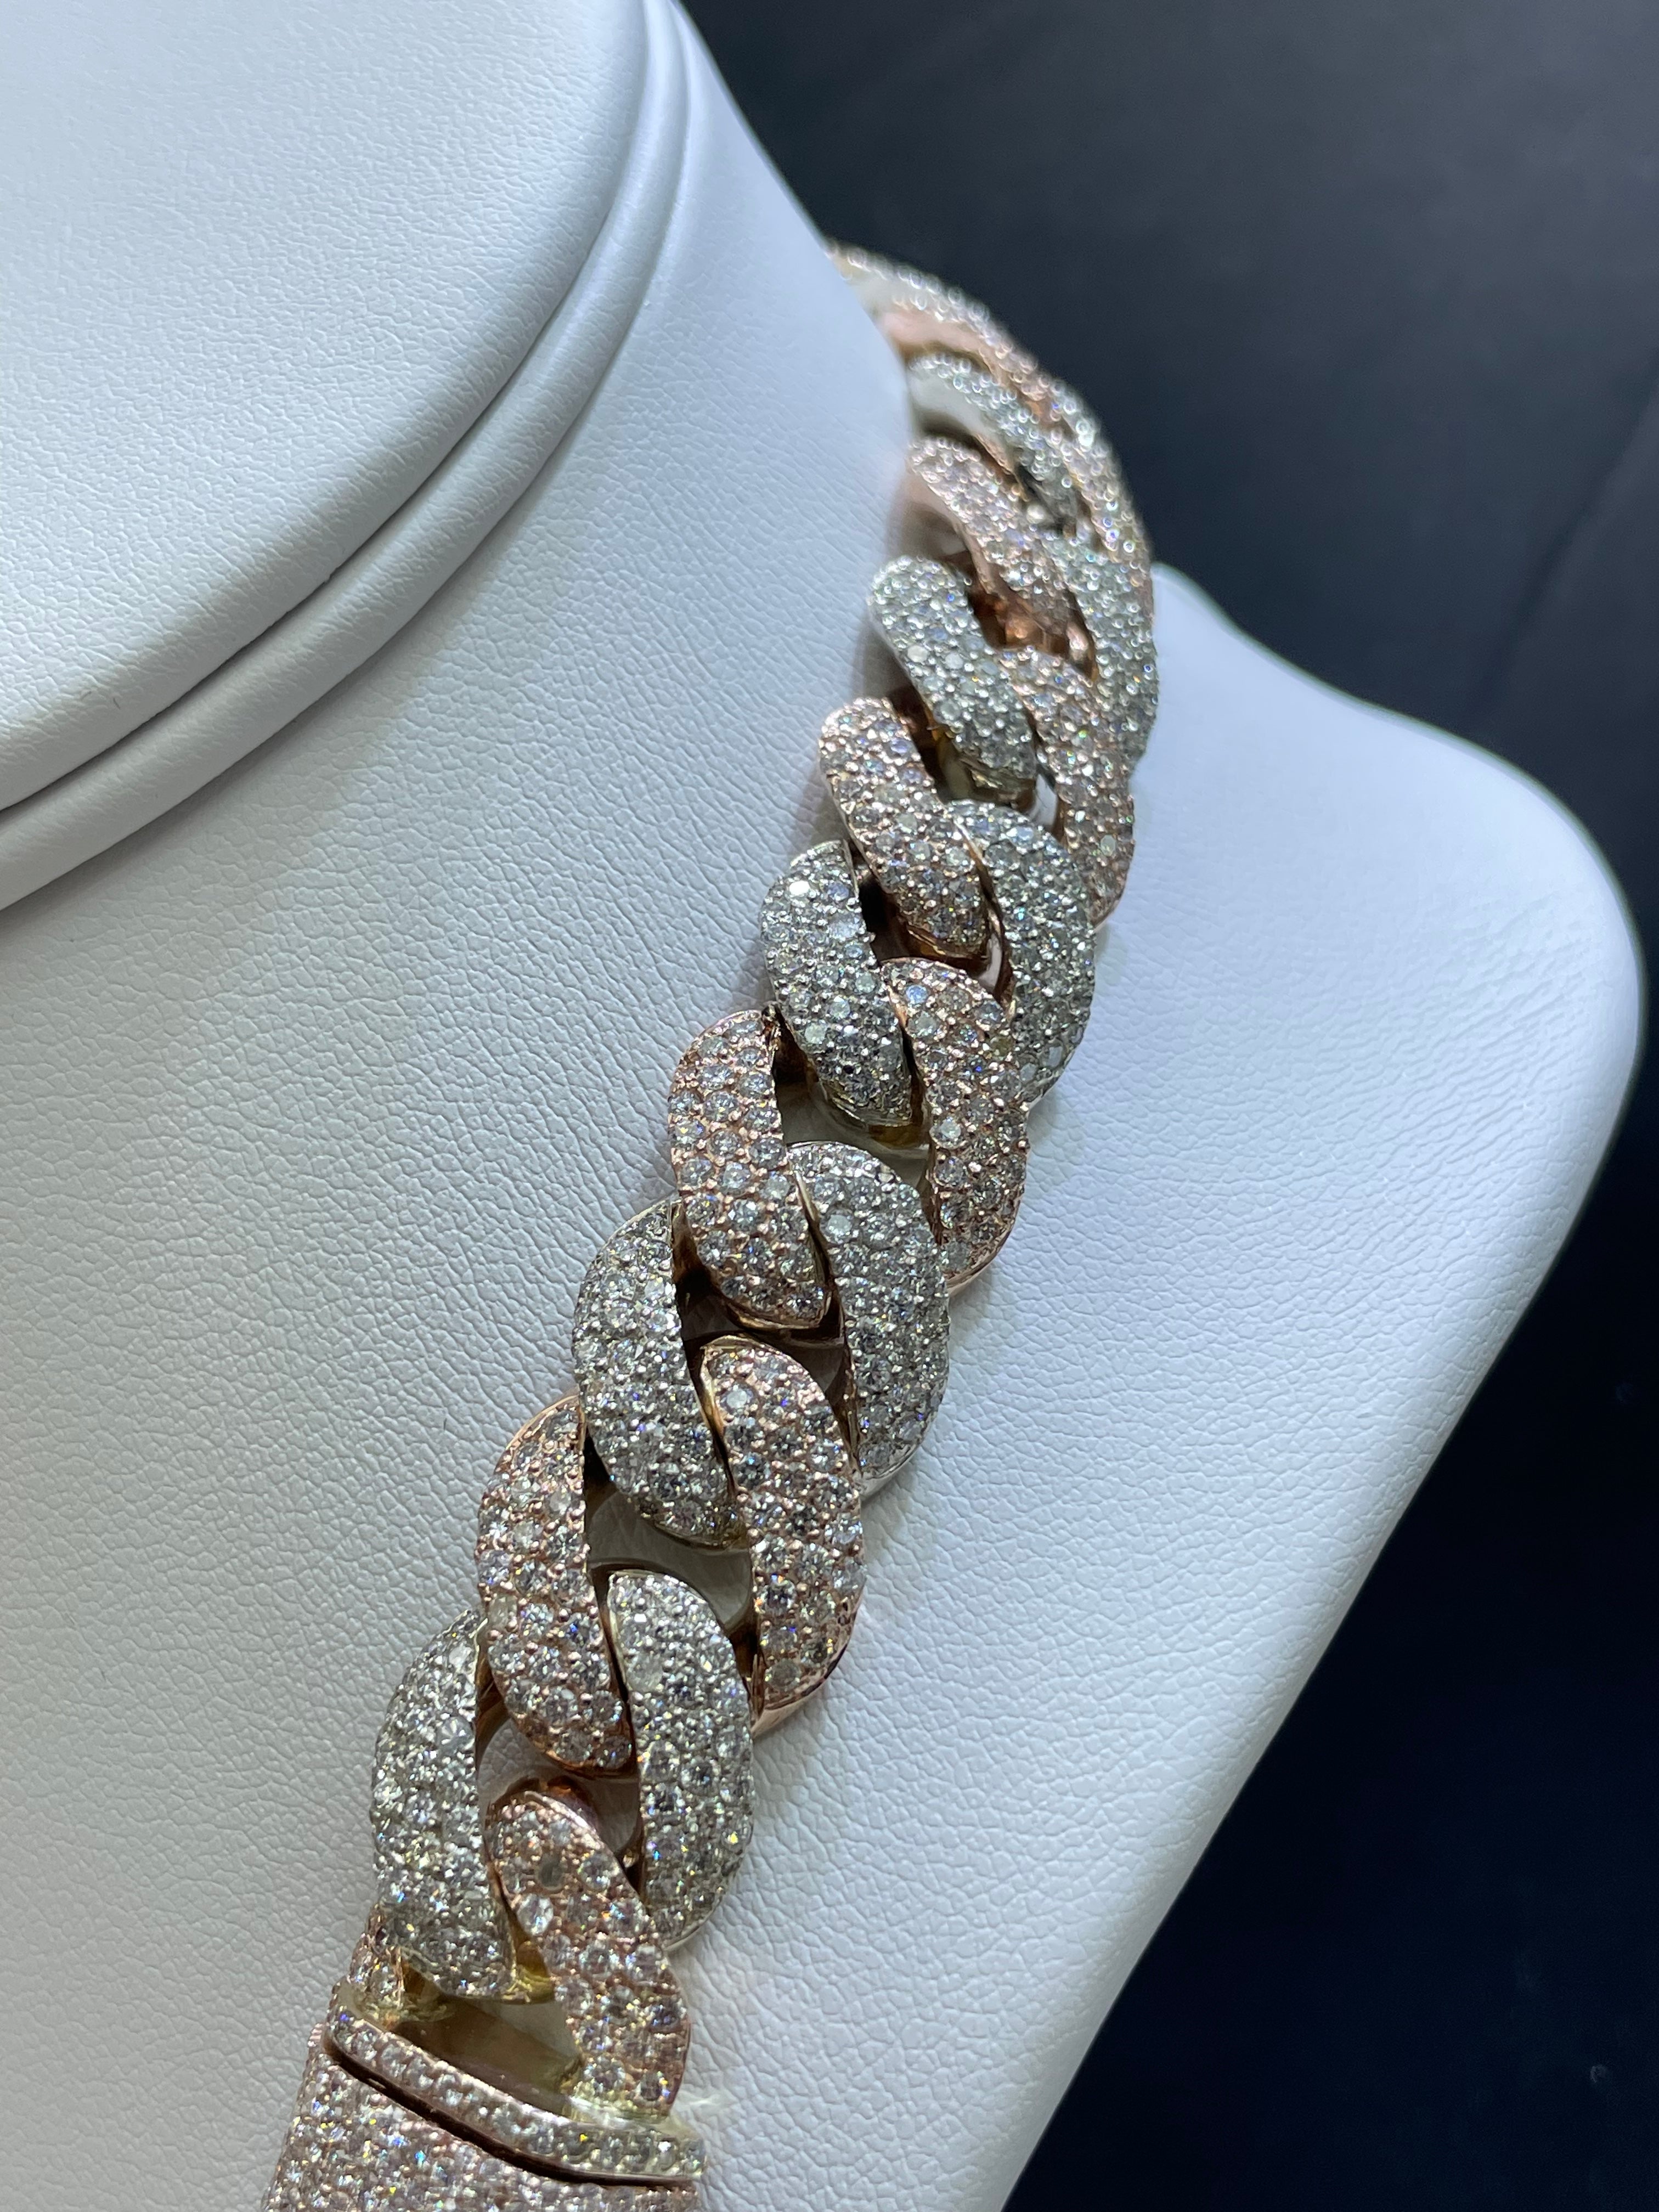 14k "Iced Out Miami Cuban Link" Necklace VVS1 44 CTs t.w. Rose/White  ”iced diamond “ 273 grams 14k Gold. 16mm